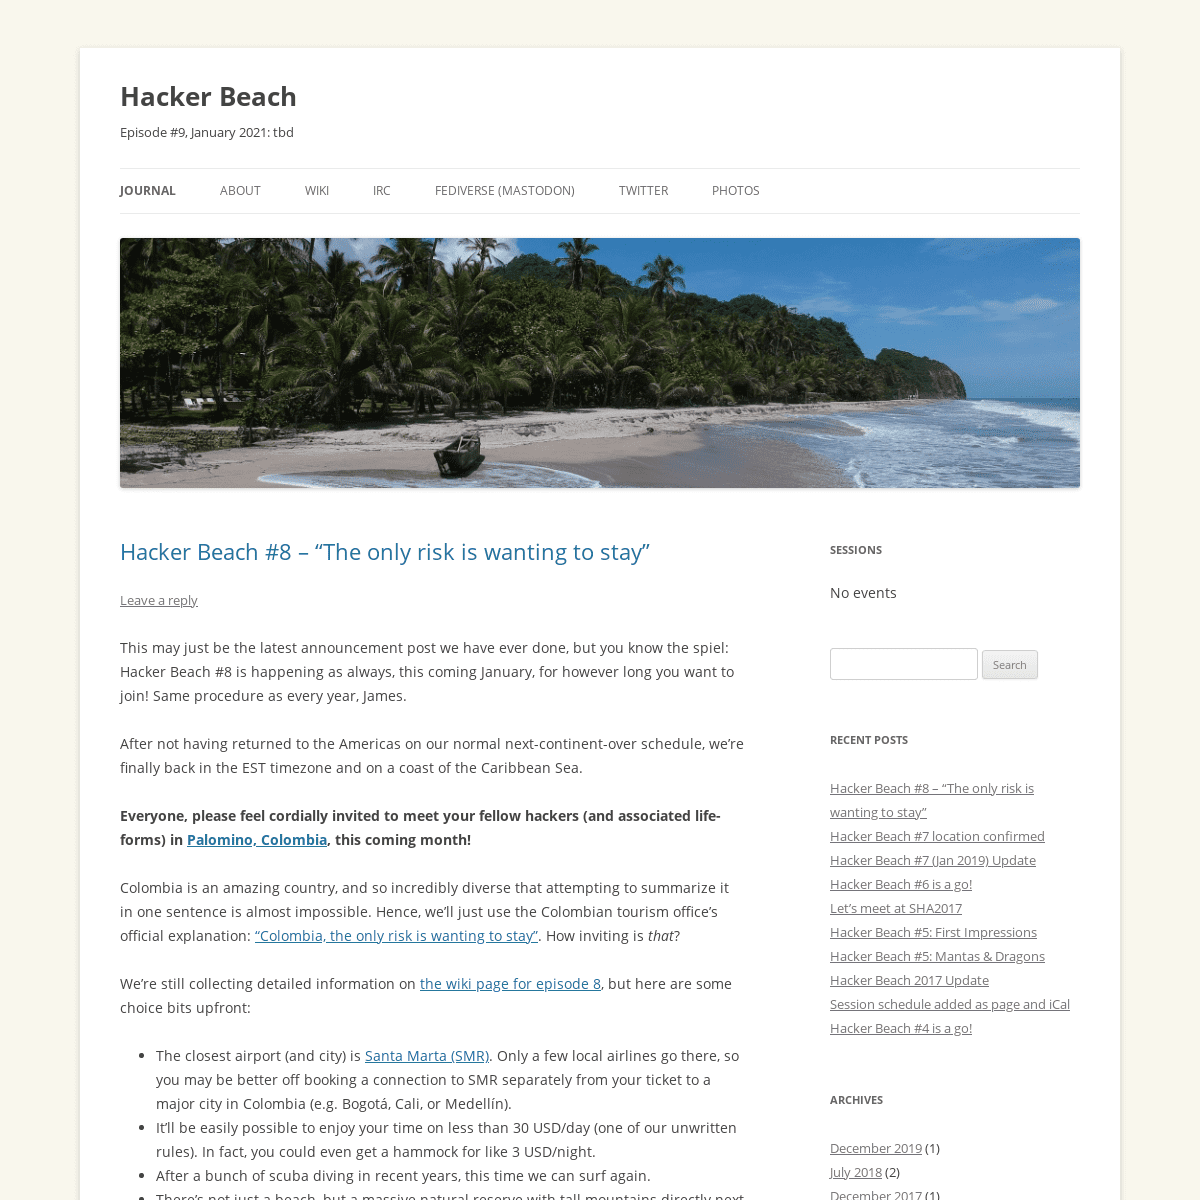 A complete backup of hackerbeach.org